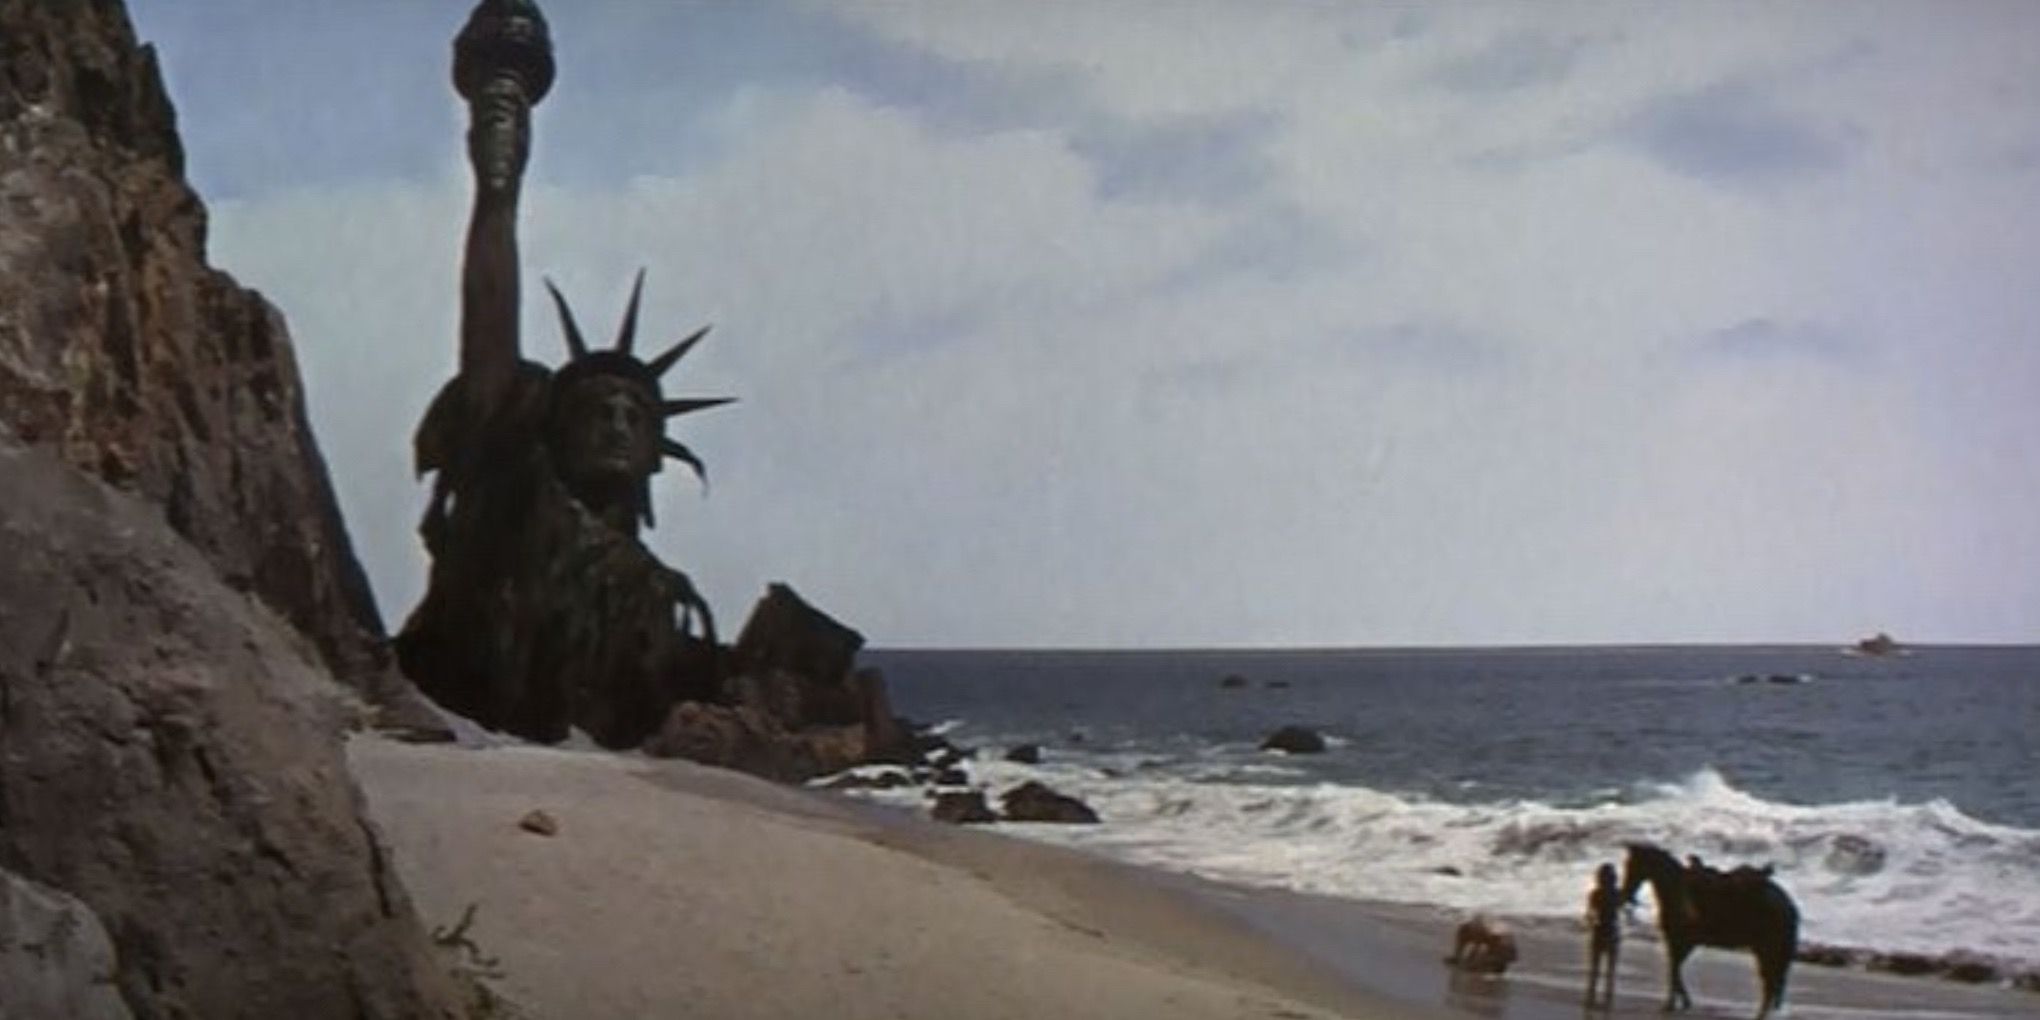 The destroyed Statue of Liberty rises out of the sand in Planet of the Apes 